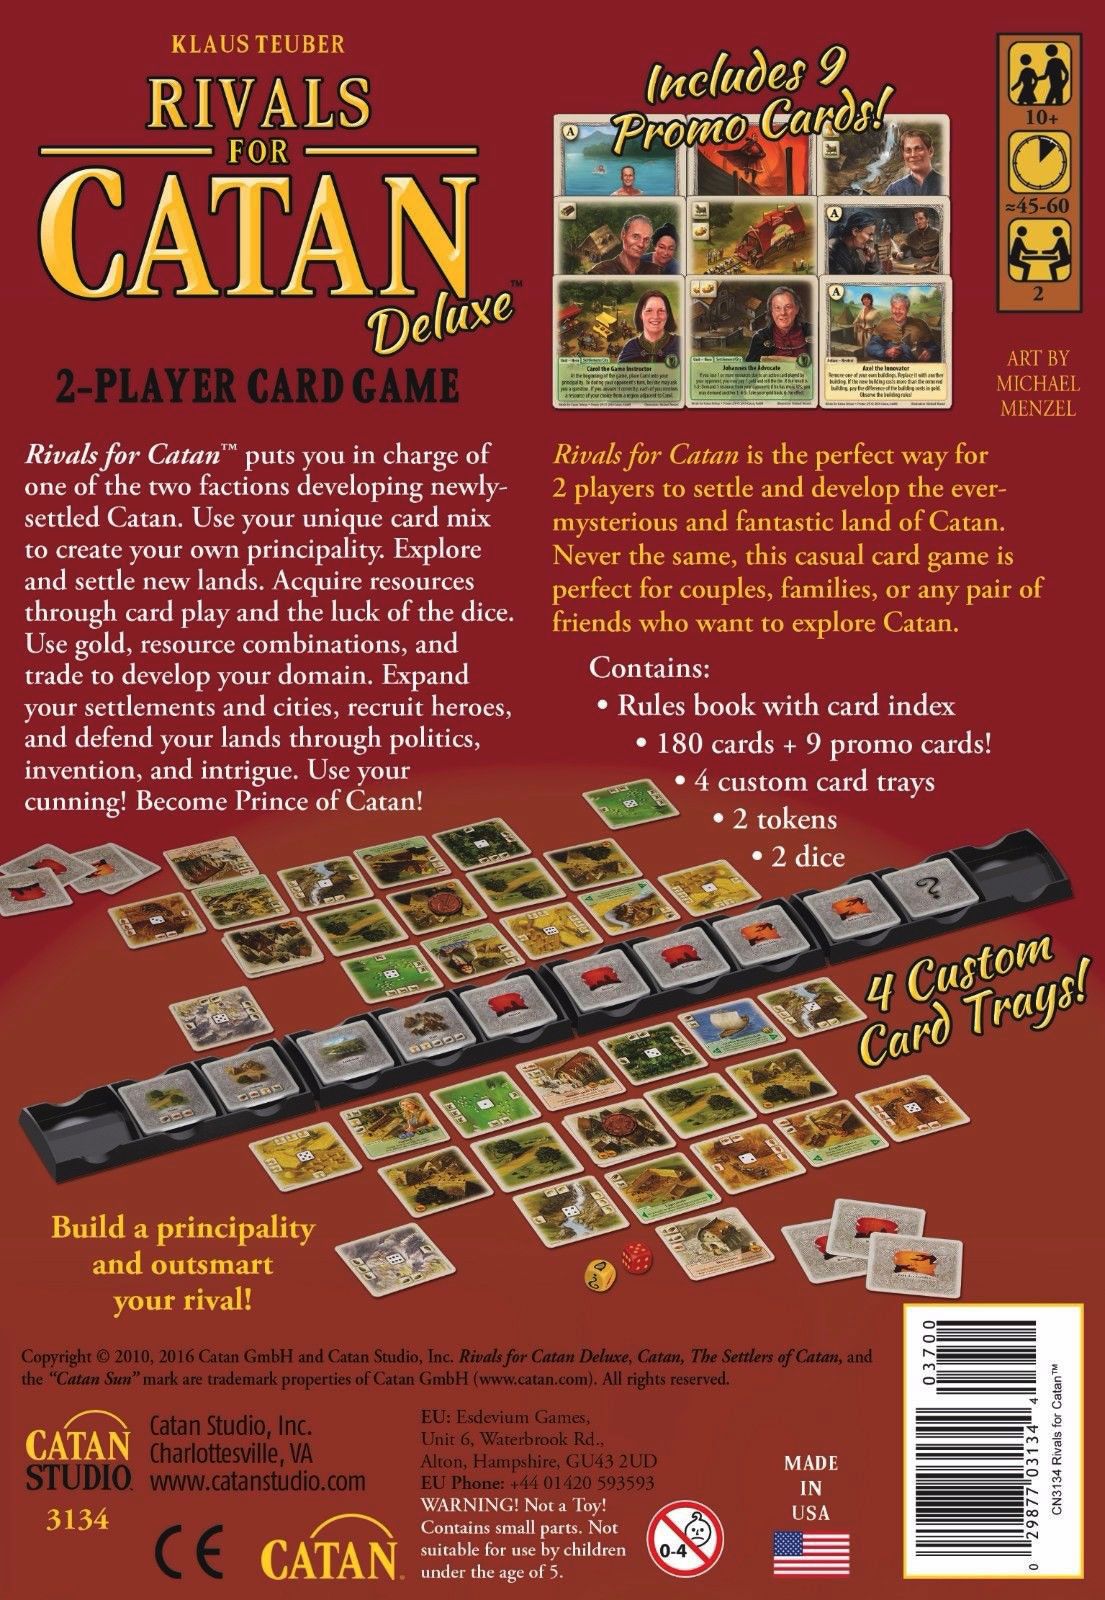 two player card game